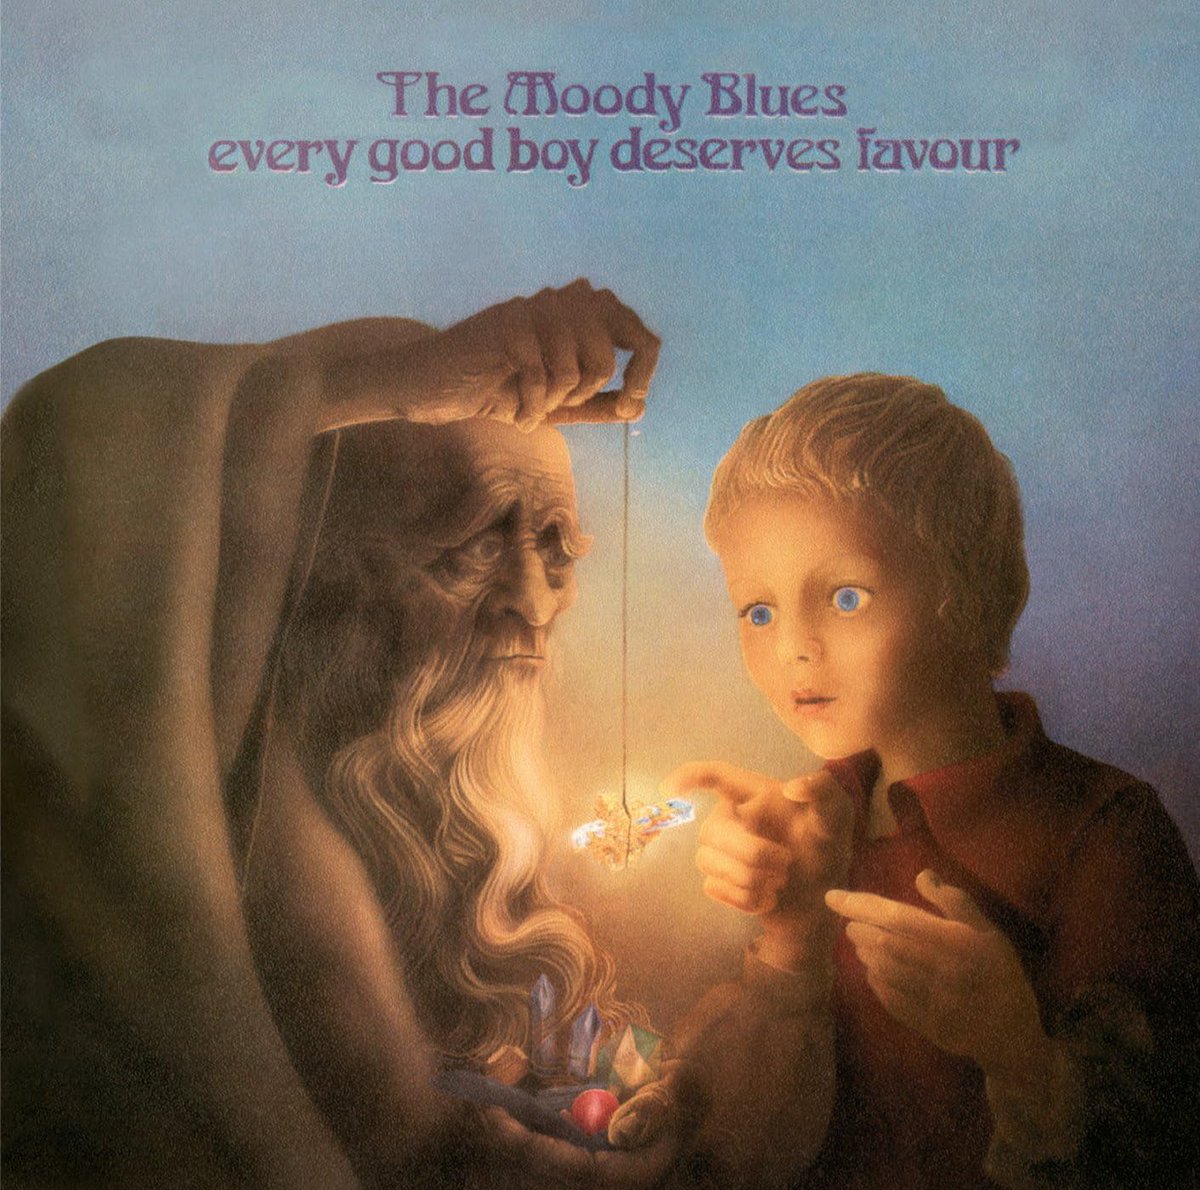 The Moody Blues - Every Good Boy Deserves Favour, 1971 
The title is taken from the student mnemonic for the lines of the treble clef: E-G-B-D-F. 
These notes are heard on piano during 'Procession' and the theme is carried out through the rest of the album. 

#TheMoodyBlues